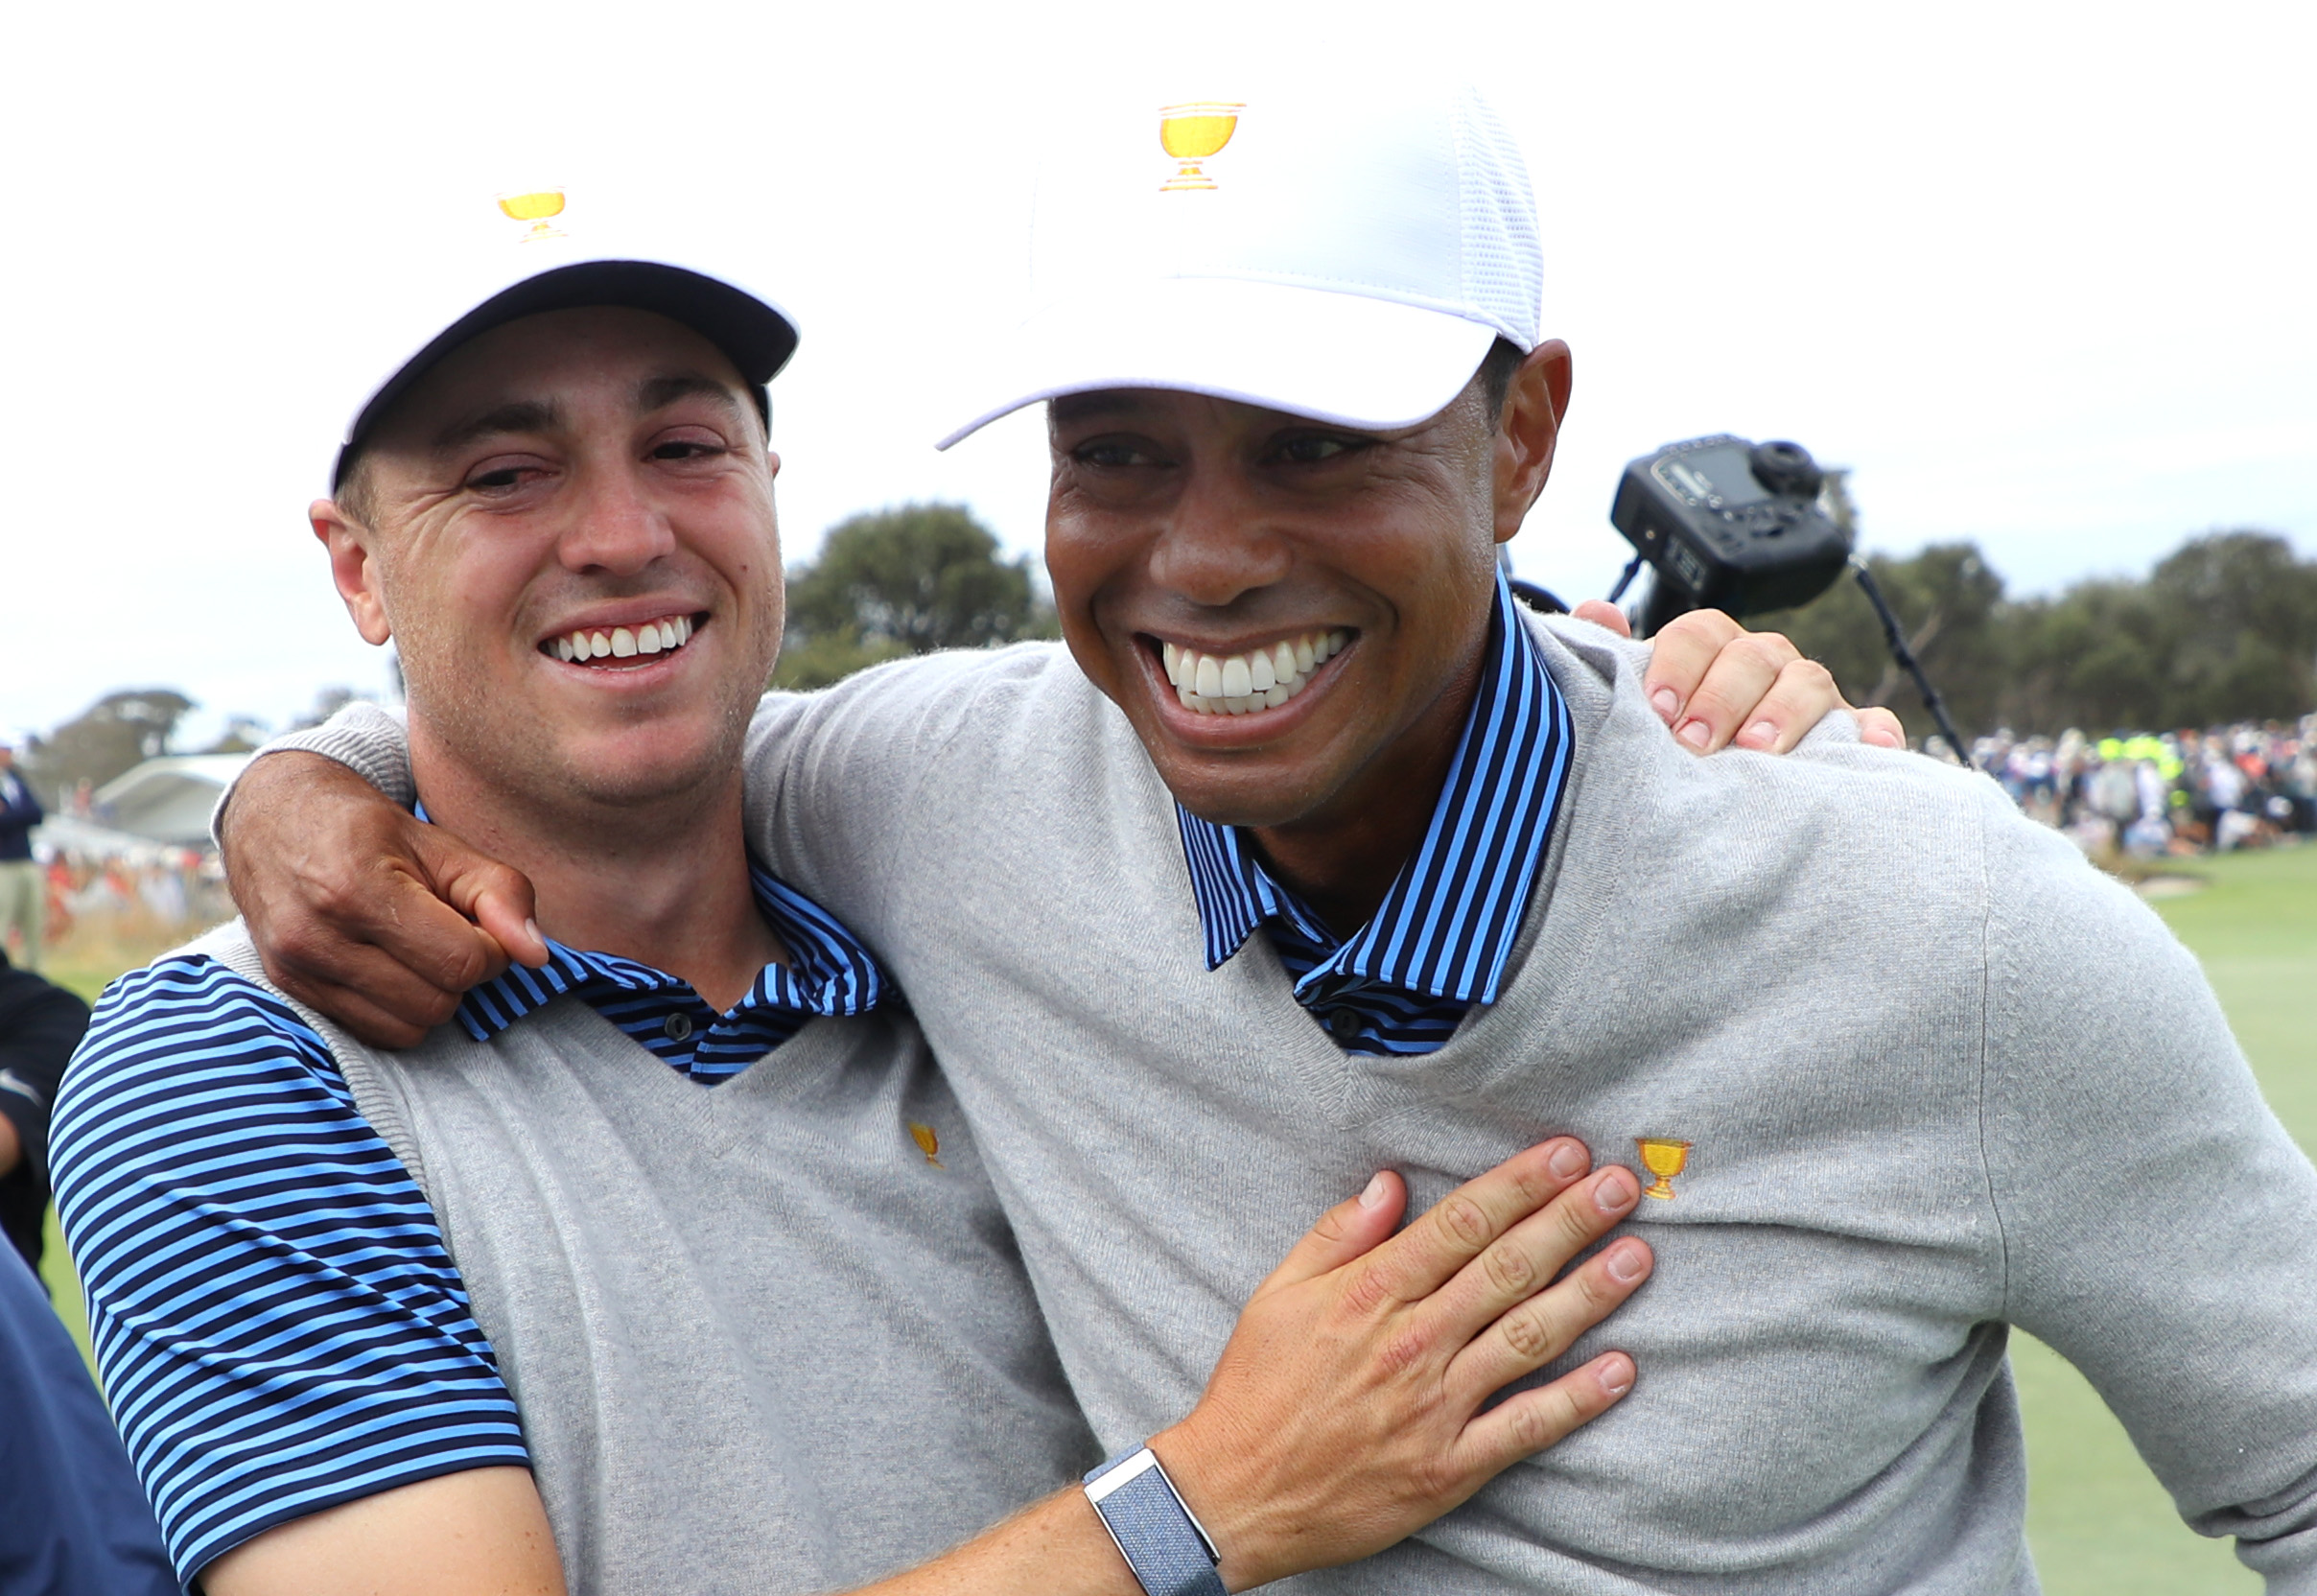 Tiger Woods to open course with TV match featuring Justin Thomas, Rory  McIlroy and Justin Rose | Golf News and Tour Information | Golf Digest